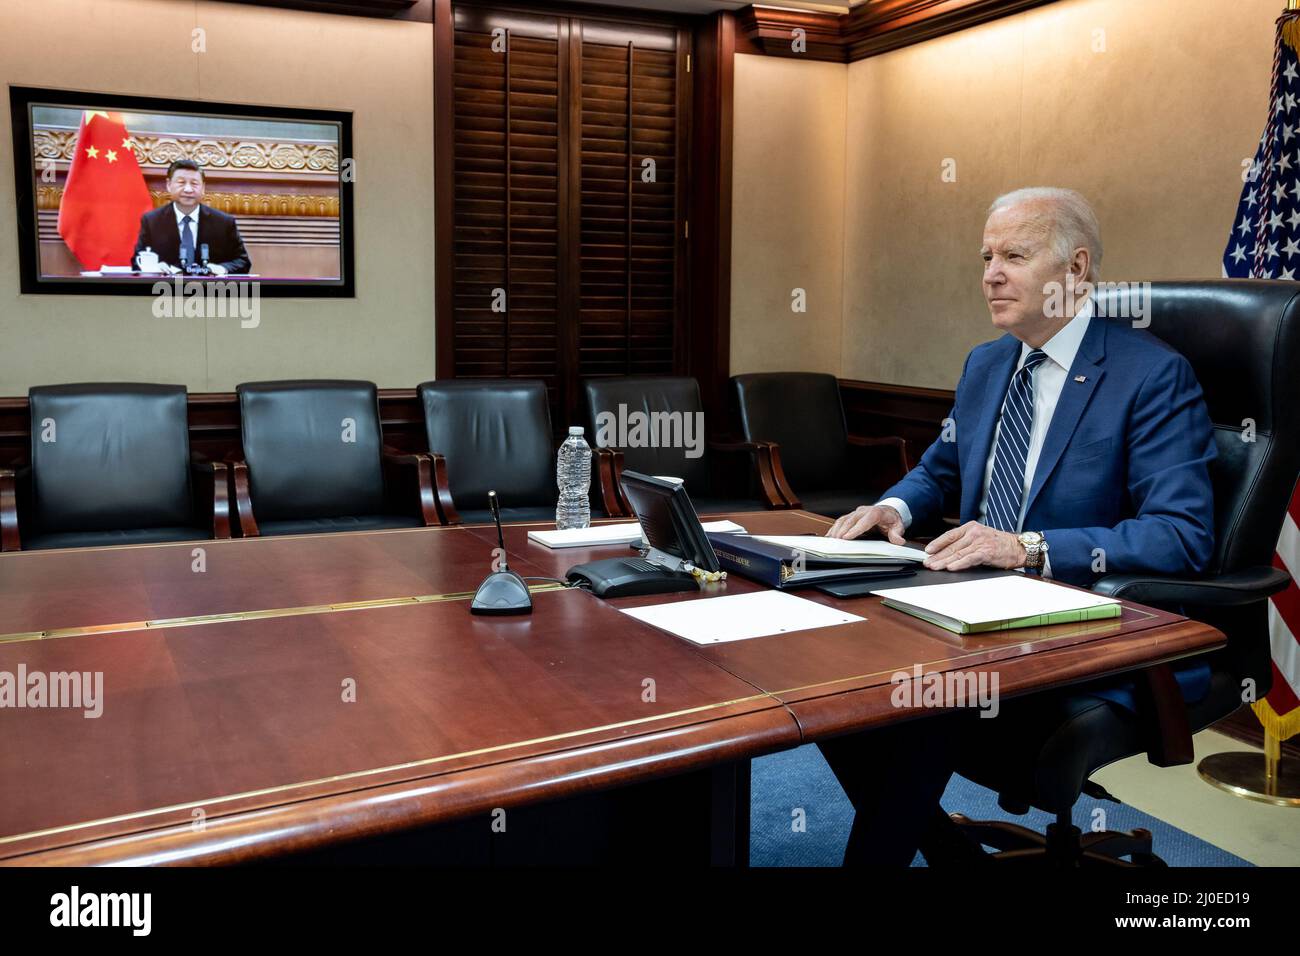 The White House provided this photo of United States President Joe Biden's video meeting with President Xi Jinping of China from the Situation Room at the White House in Washington, DC on Friday, March 18, 2022.Mandatory Credit: White House via CNP /MediaPunch Stock Photo